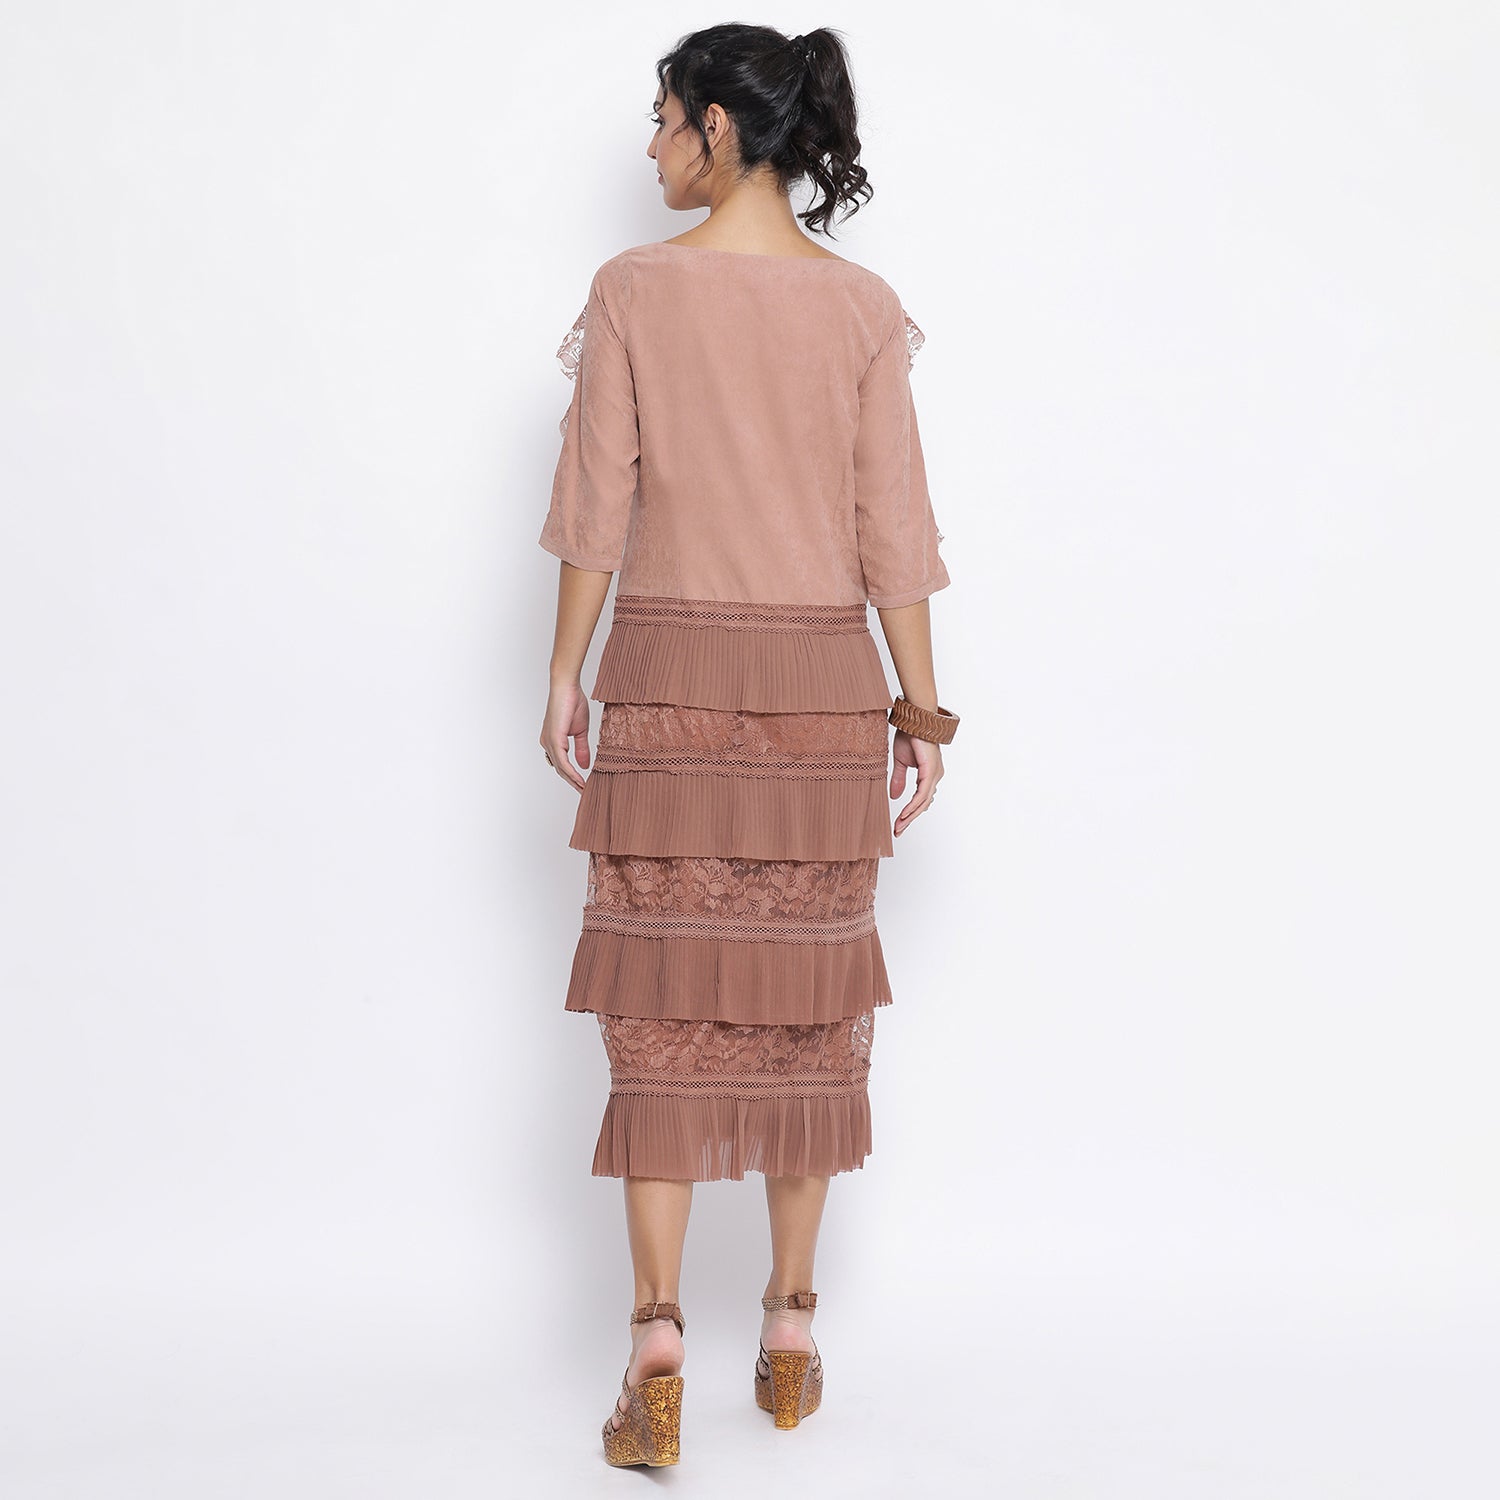 Rust Dress With Frill At Bottom